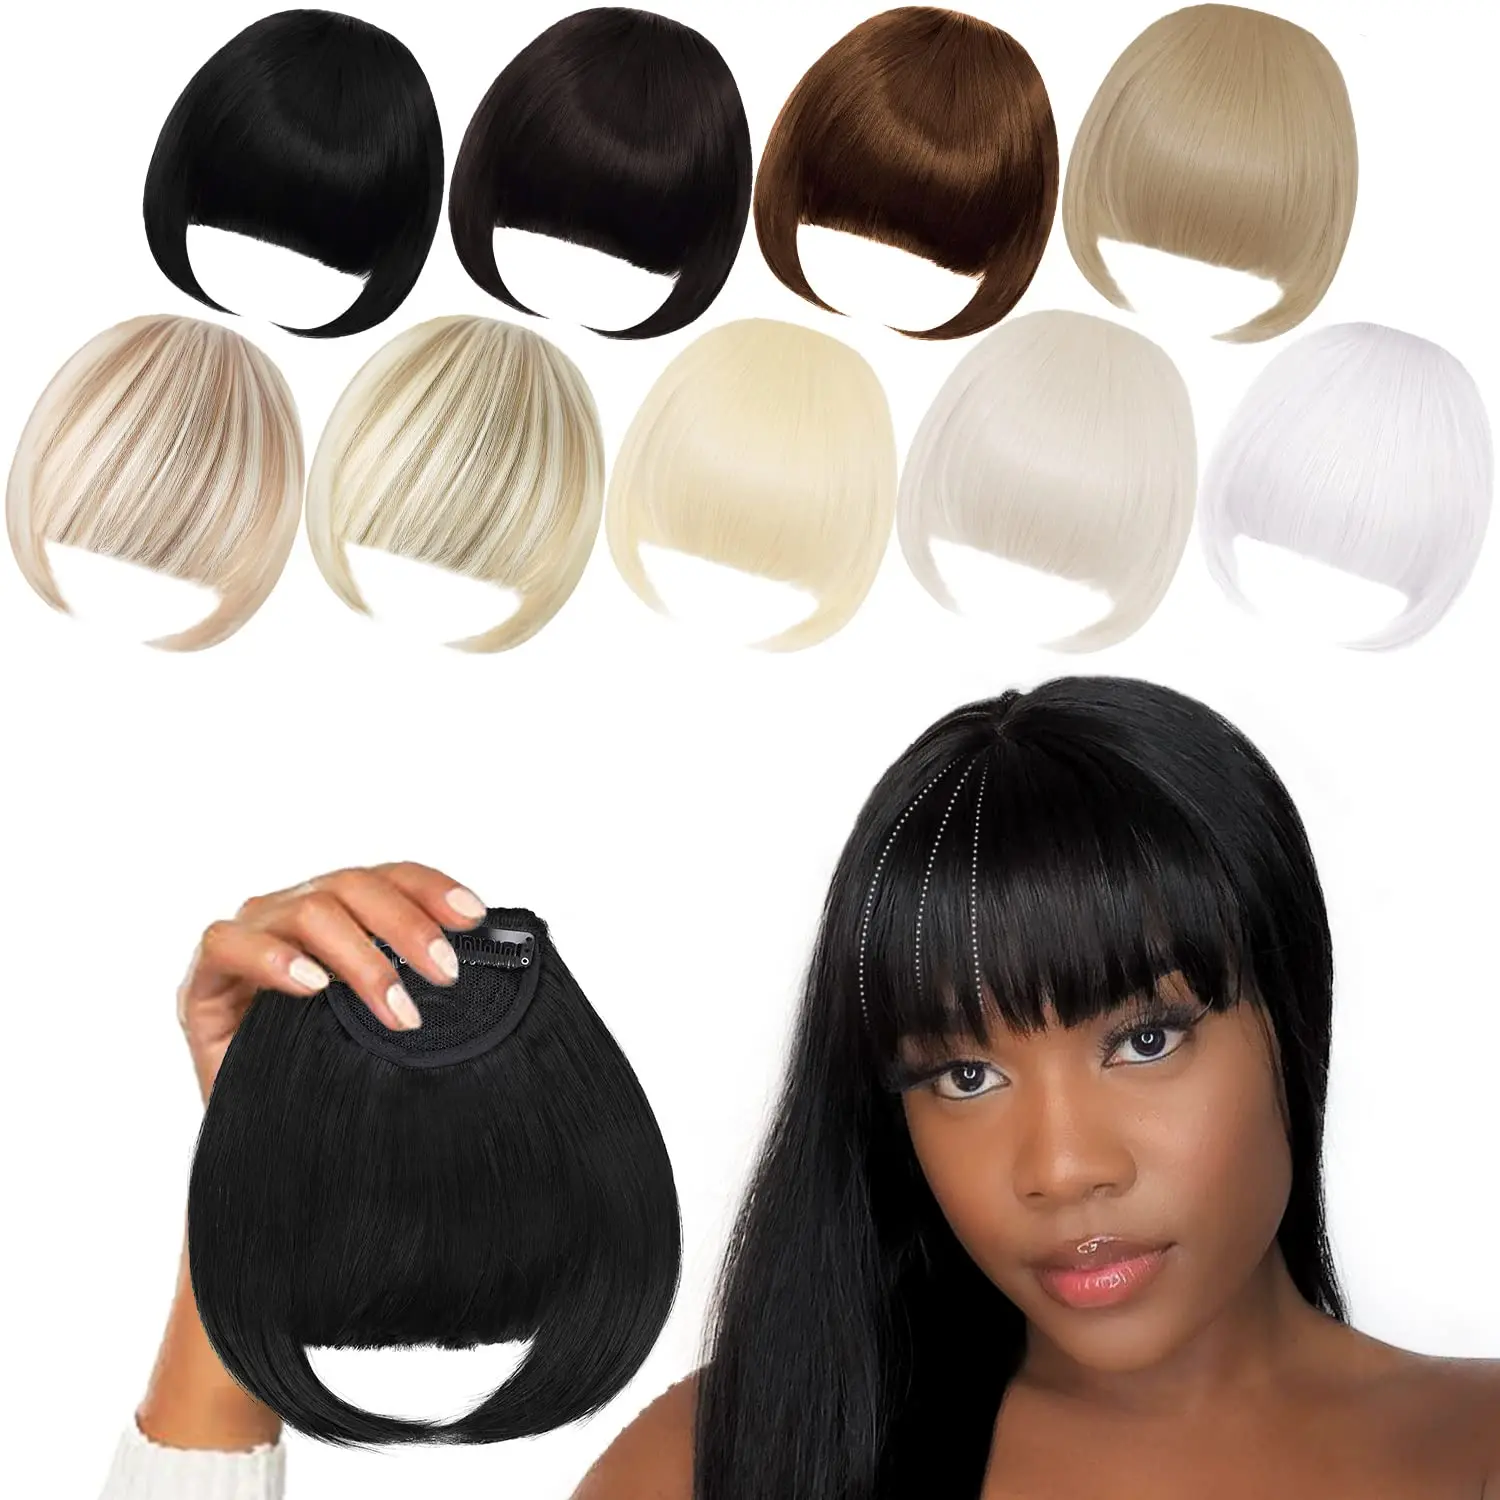 

Synthetic Bangs Hair Clip In Extensions Natural Fringe Bangs Clip In Front Neat Flat Bang One Piece Straight Hairpiece For Women